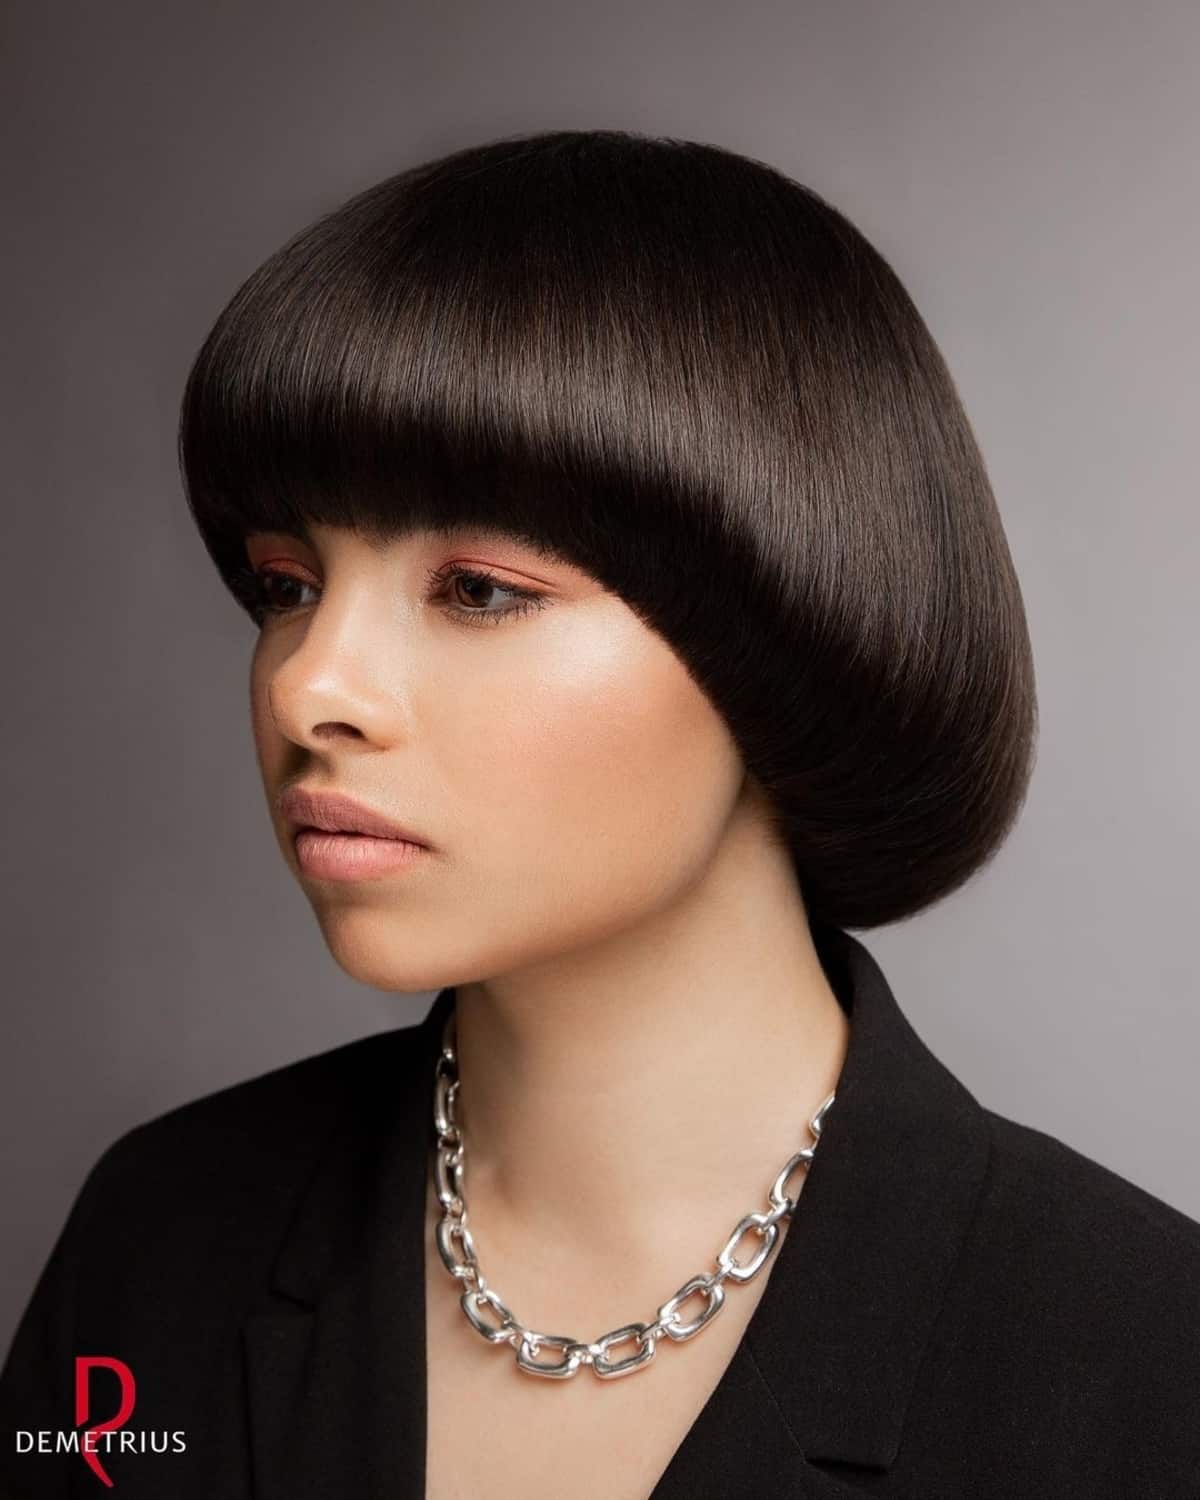 Why you should consider getting a bowl cut this year